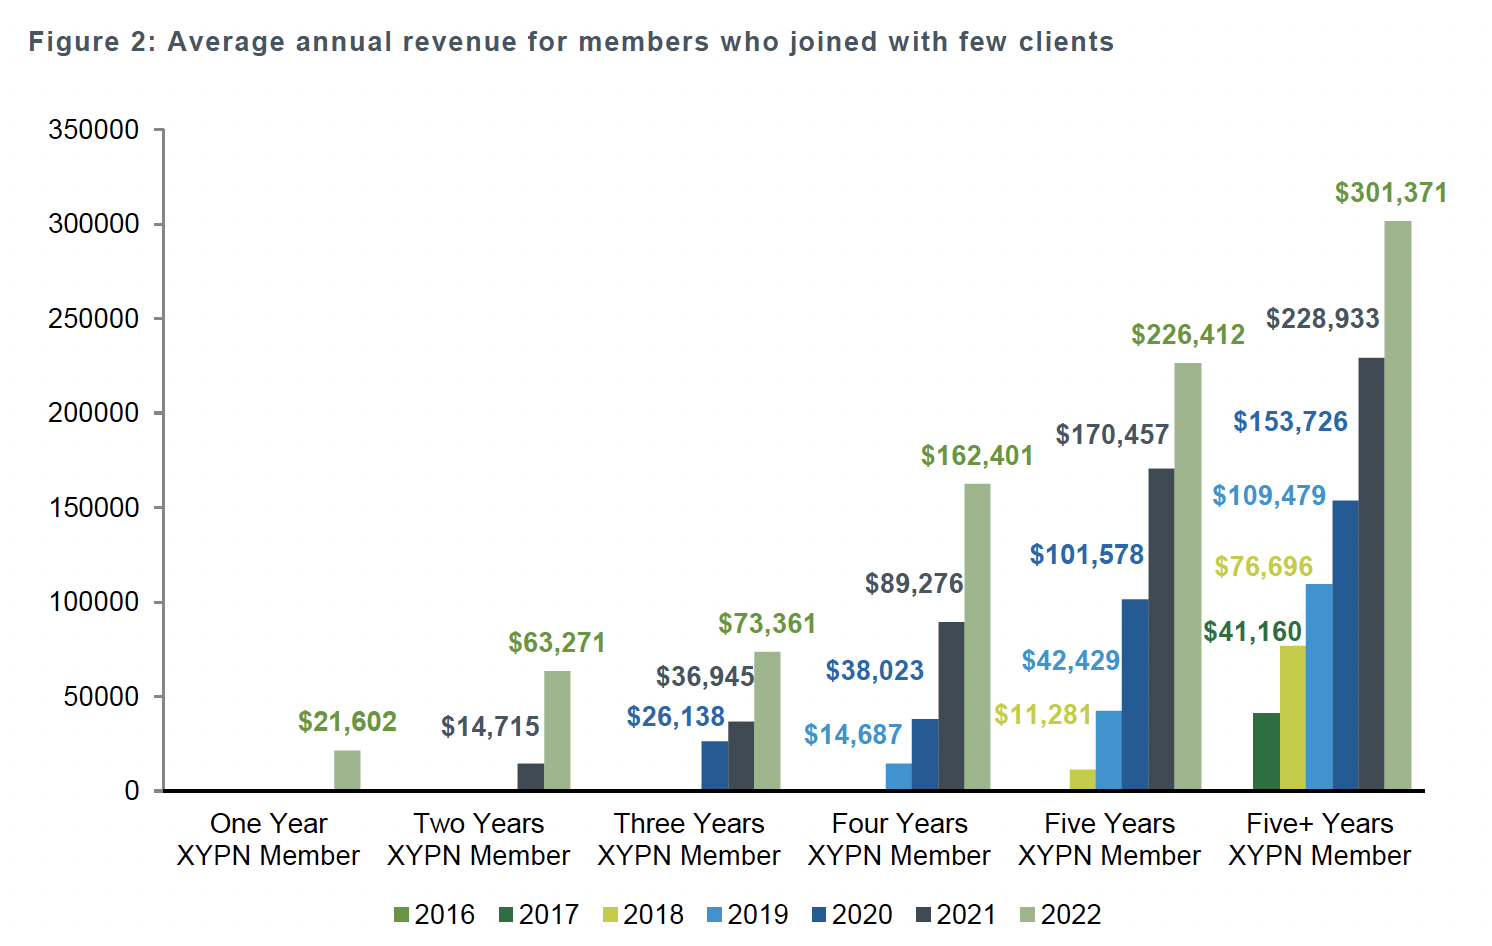 Average Annual Revenue for Members Who Joined With Few Clients